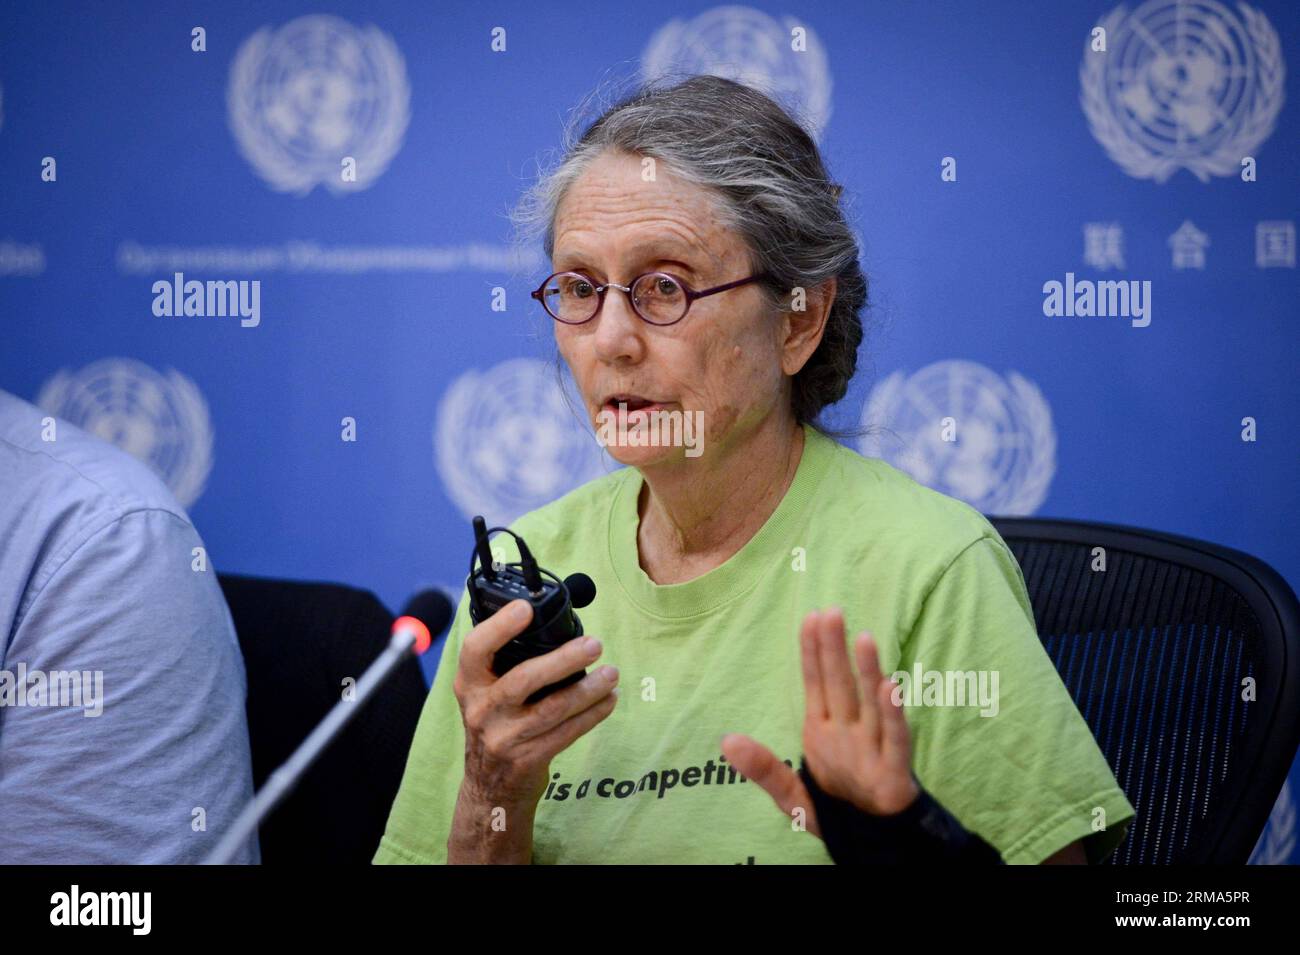 Freelance journalist and blogger Jane Stillwater, one of five US observers who monitored the Syrian presidential election, speaks during their joint press conference with Syrian Permanent Representative to the United Nations Bashar Ja afari (not in picture) at the UN headquarters in New York, on June 18, 2014. (Xinhua/Niu Xiaolei) UN-NEW YORK-SYRIA-ELECTION-OBSERVERS PUBLICATIONxNOTxINxCHN   freelance Journalist and Blogger Jane Stillwater One of Five U.S. OBSERVERS Who Monitored The Syrian Presidential ELECTION Speaks during their Joint Press Conference With Syrian permanently Representative Stock Photo